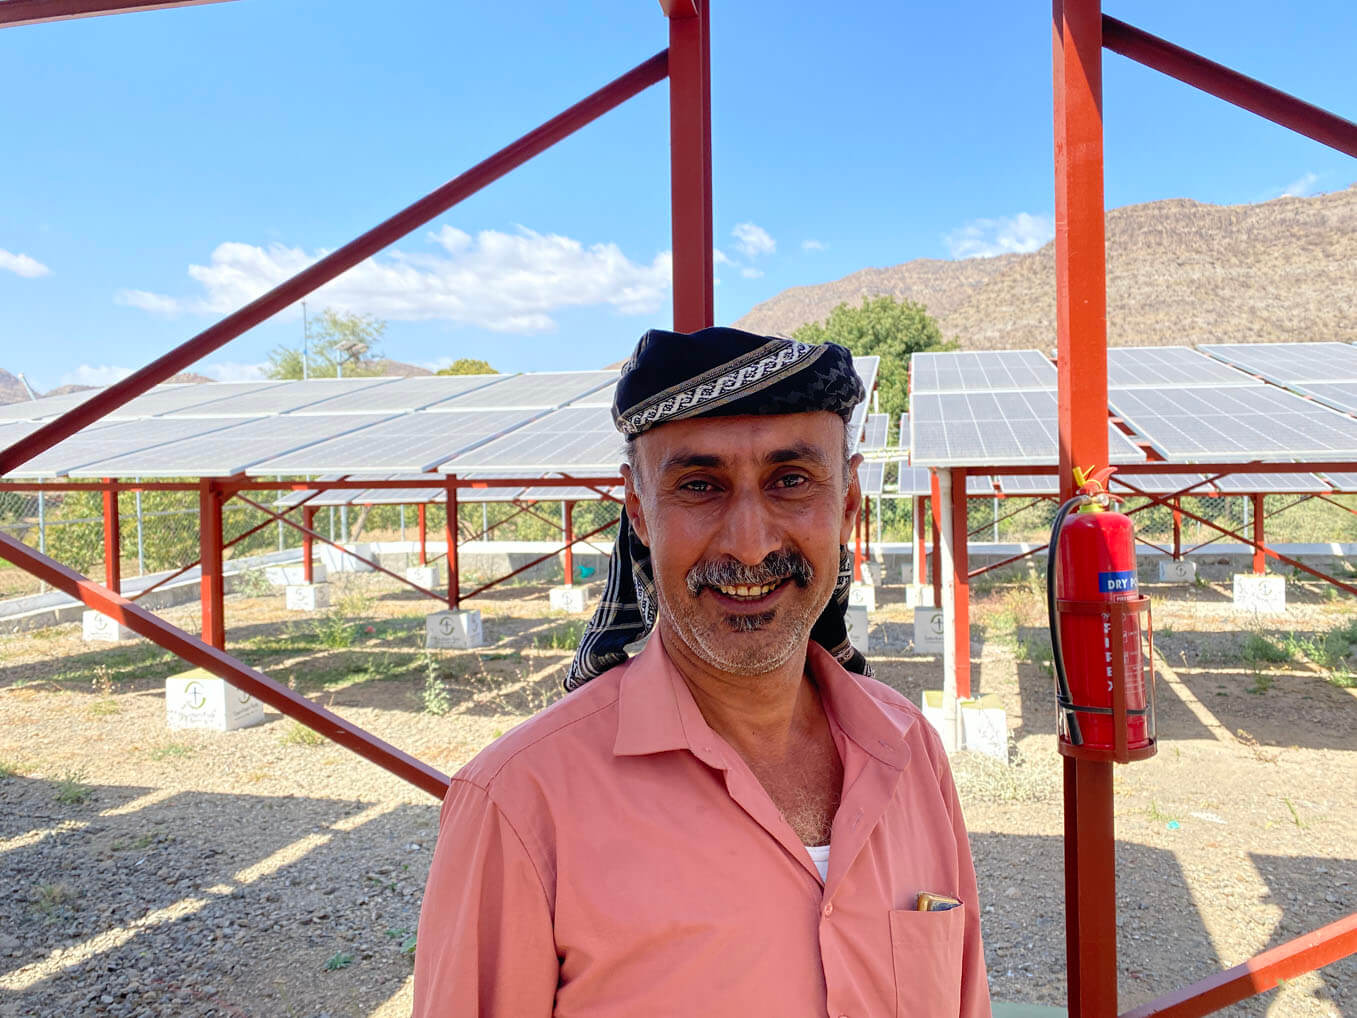 Nabil said his family is finally on their way to a healthier future, thanks to the Samaritan's Purse water project in his village.